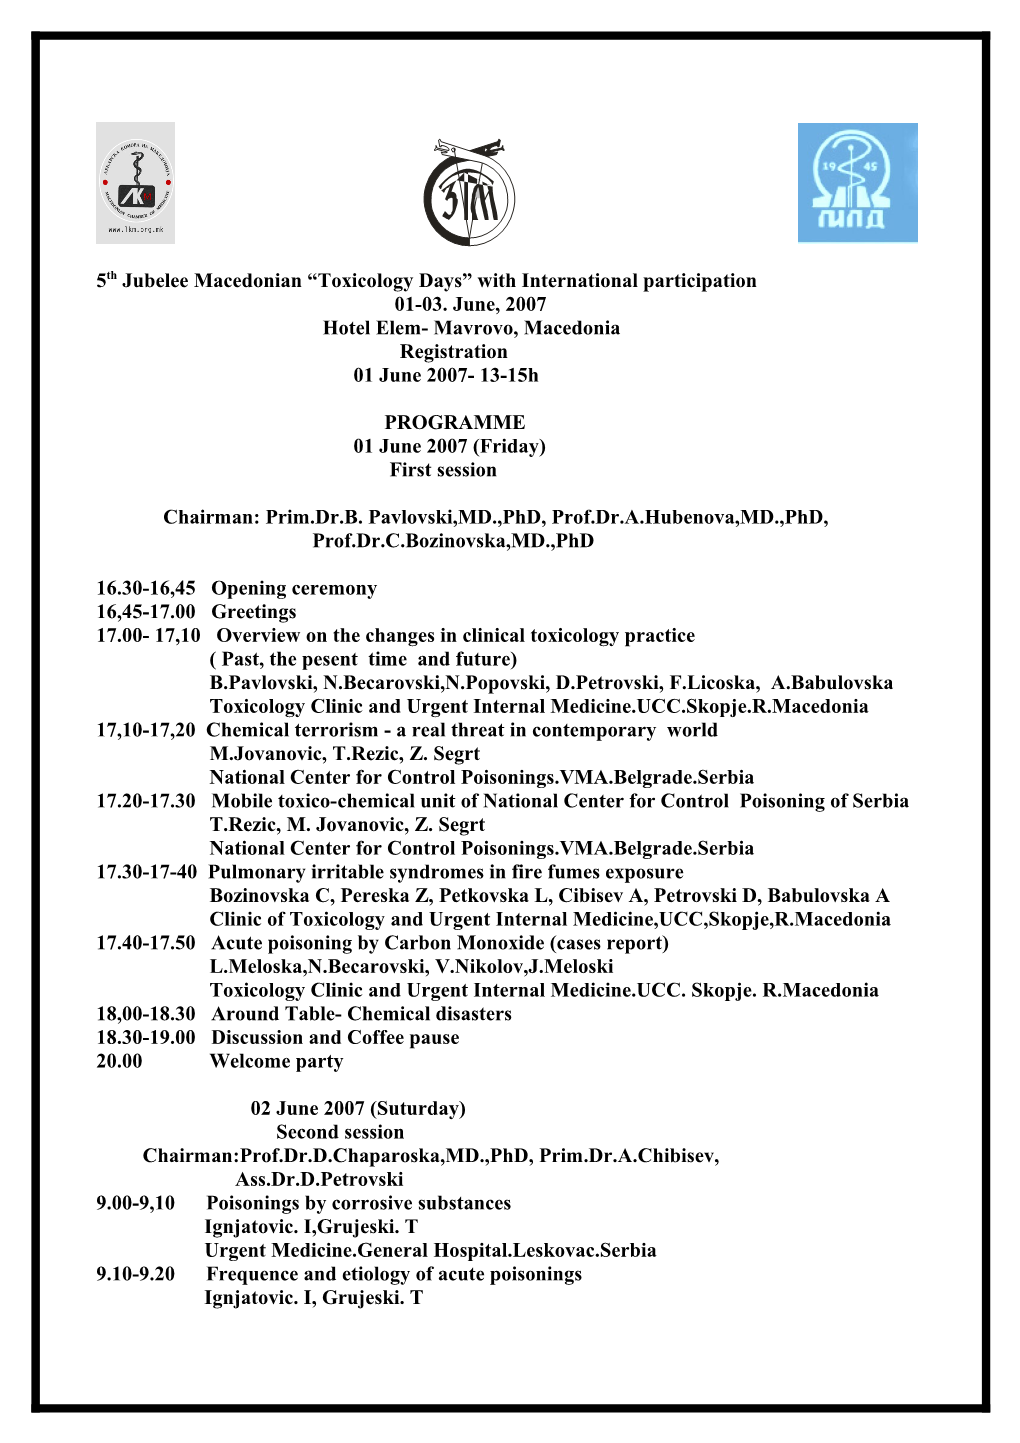 5Th Jubelee Macedonian Toxicology Days with International Participation